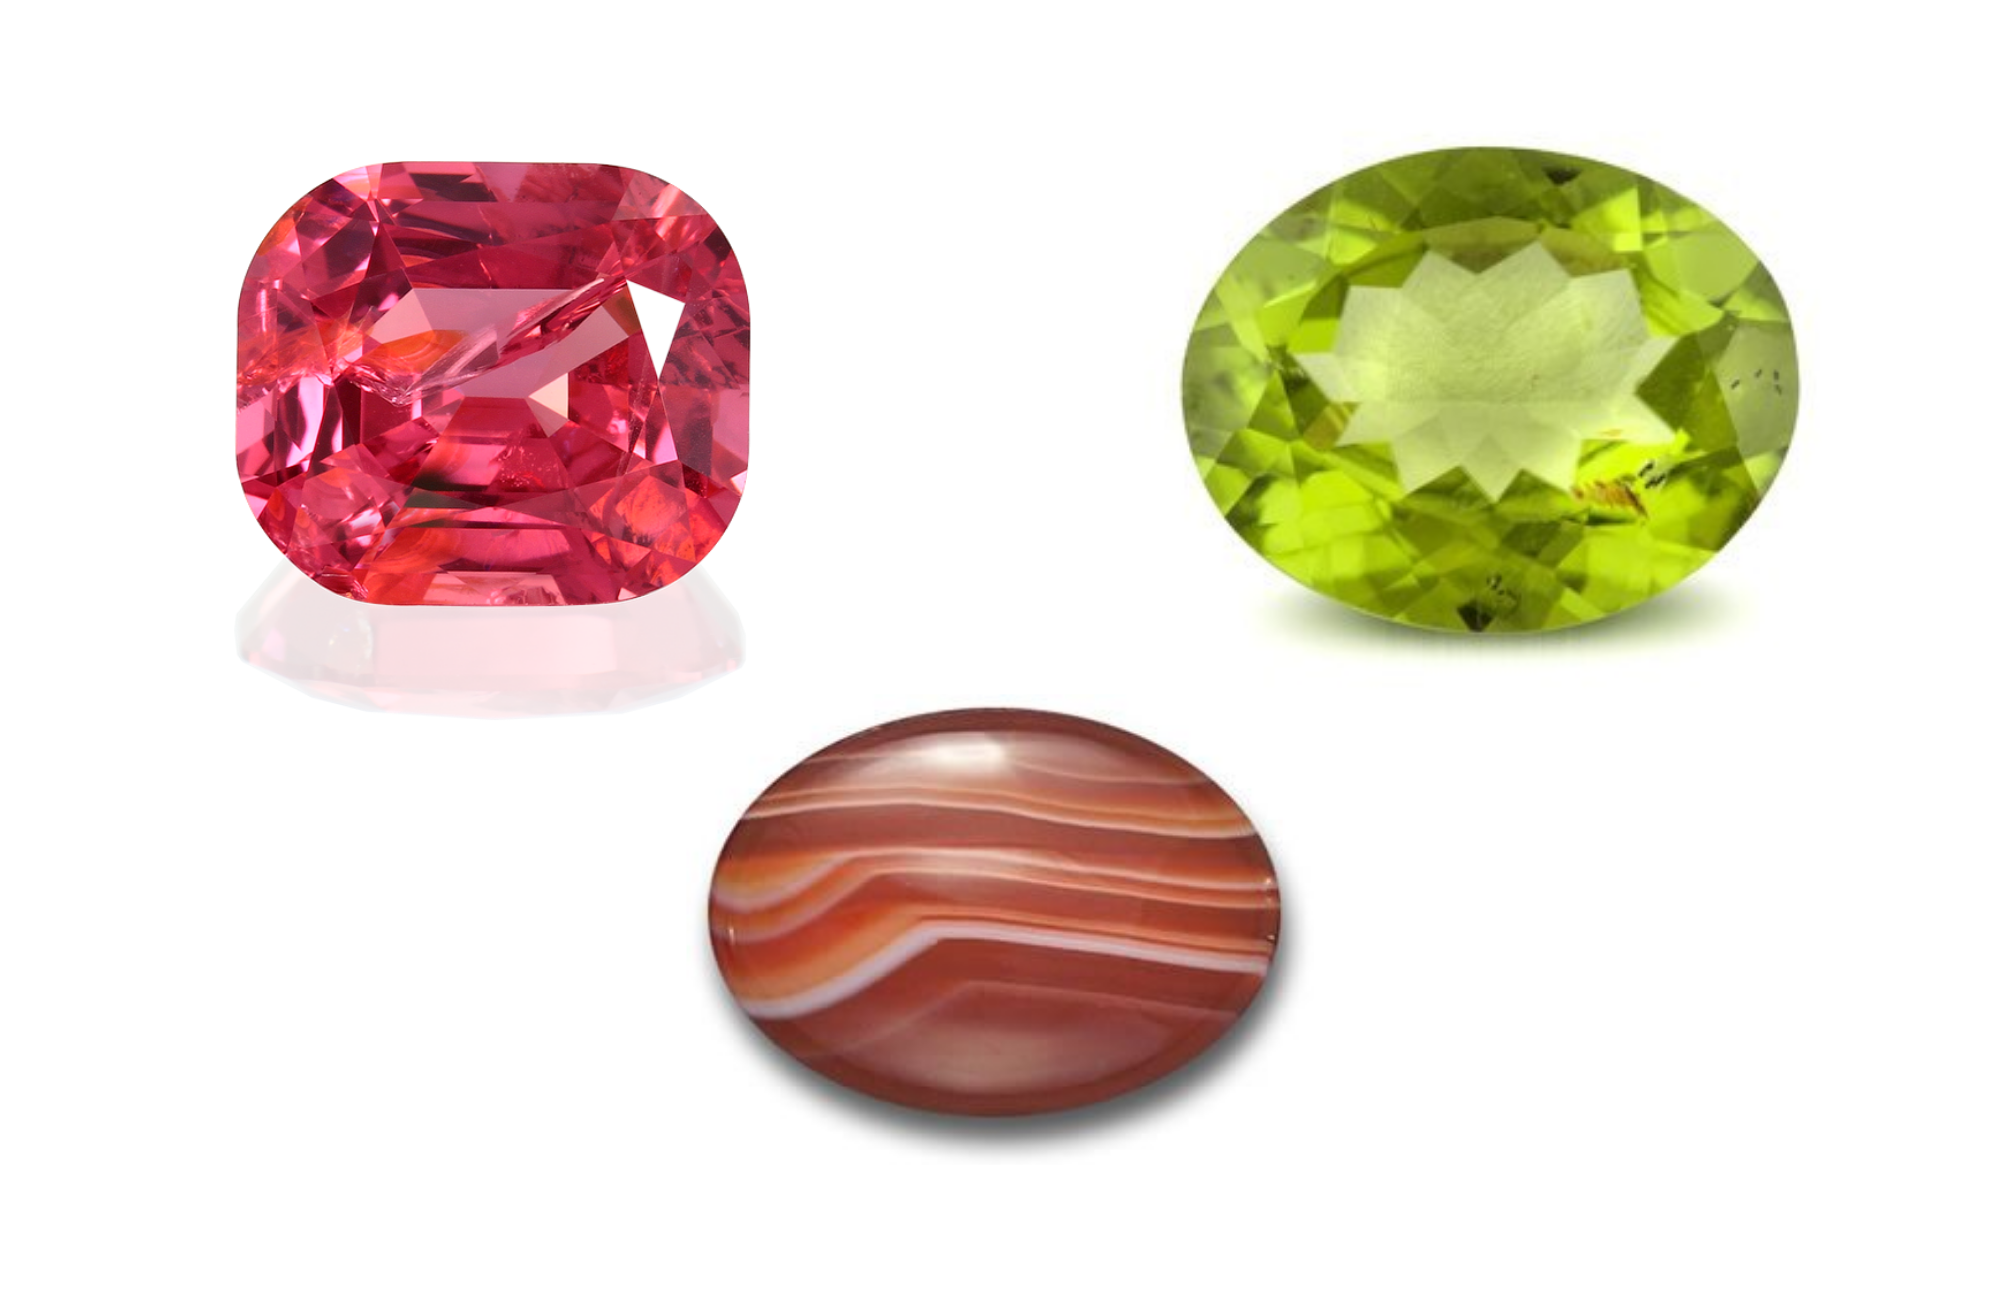 Three stones which are the Spinel, Peridot, and Sardonyx